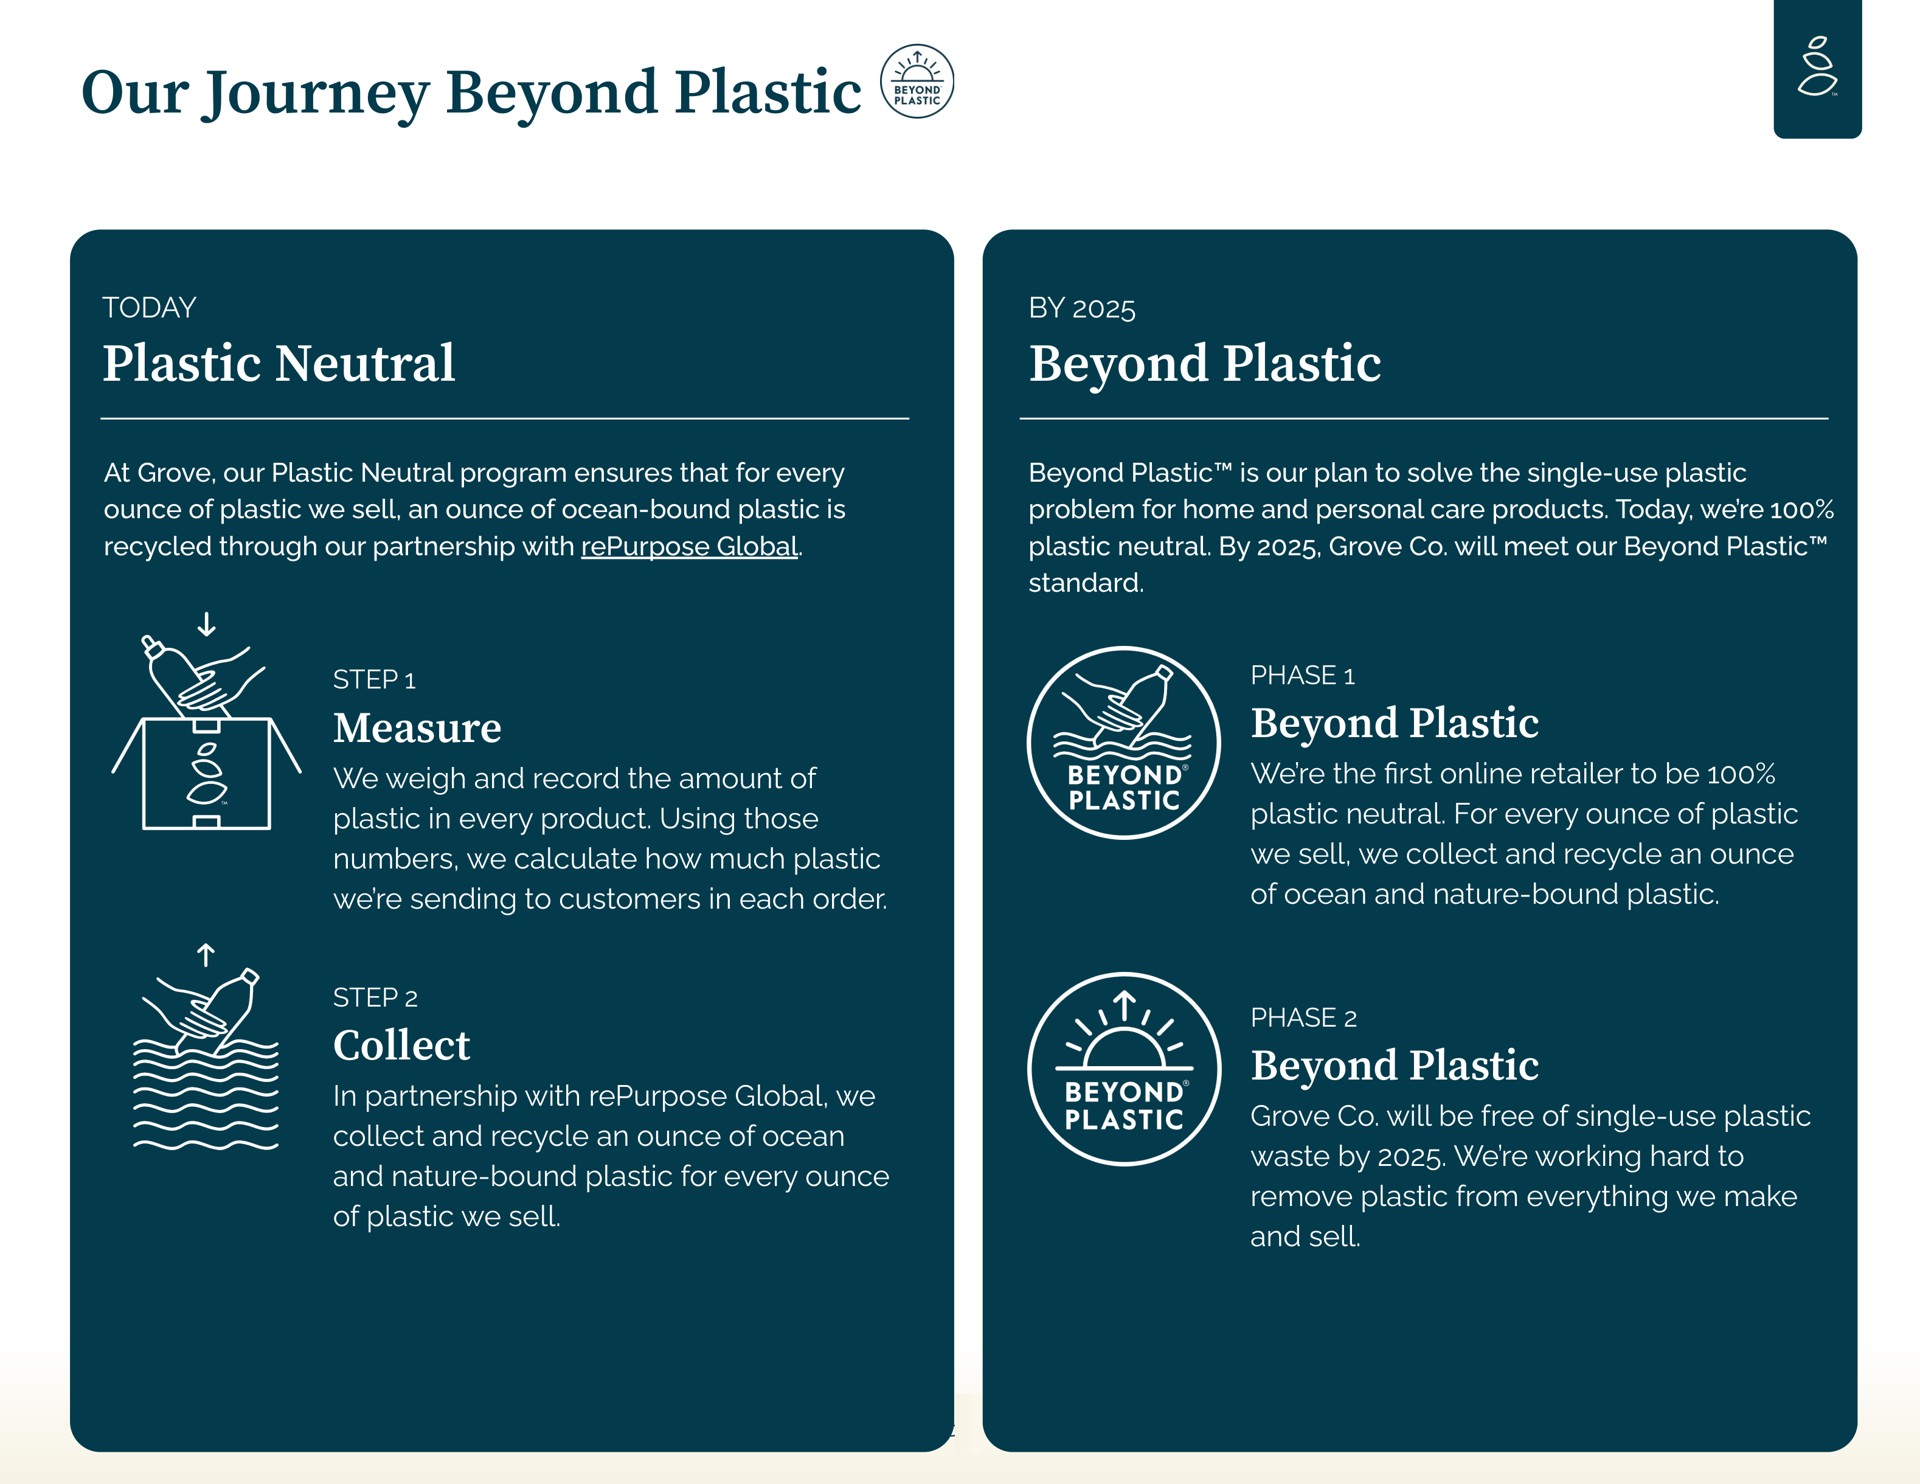 our journey beyond plastic plastic neutral beyond plastic measure collect beyond plastic beyond plastic i bes nae phase | Grove